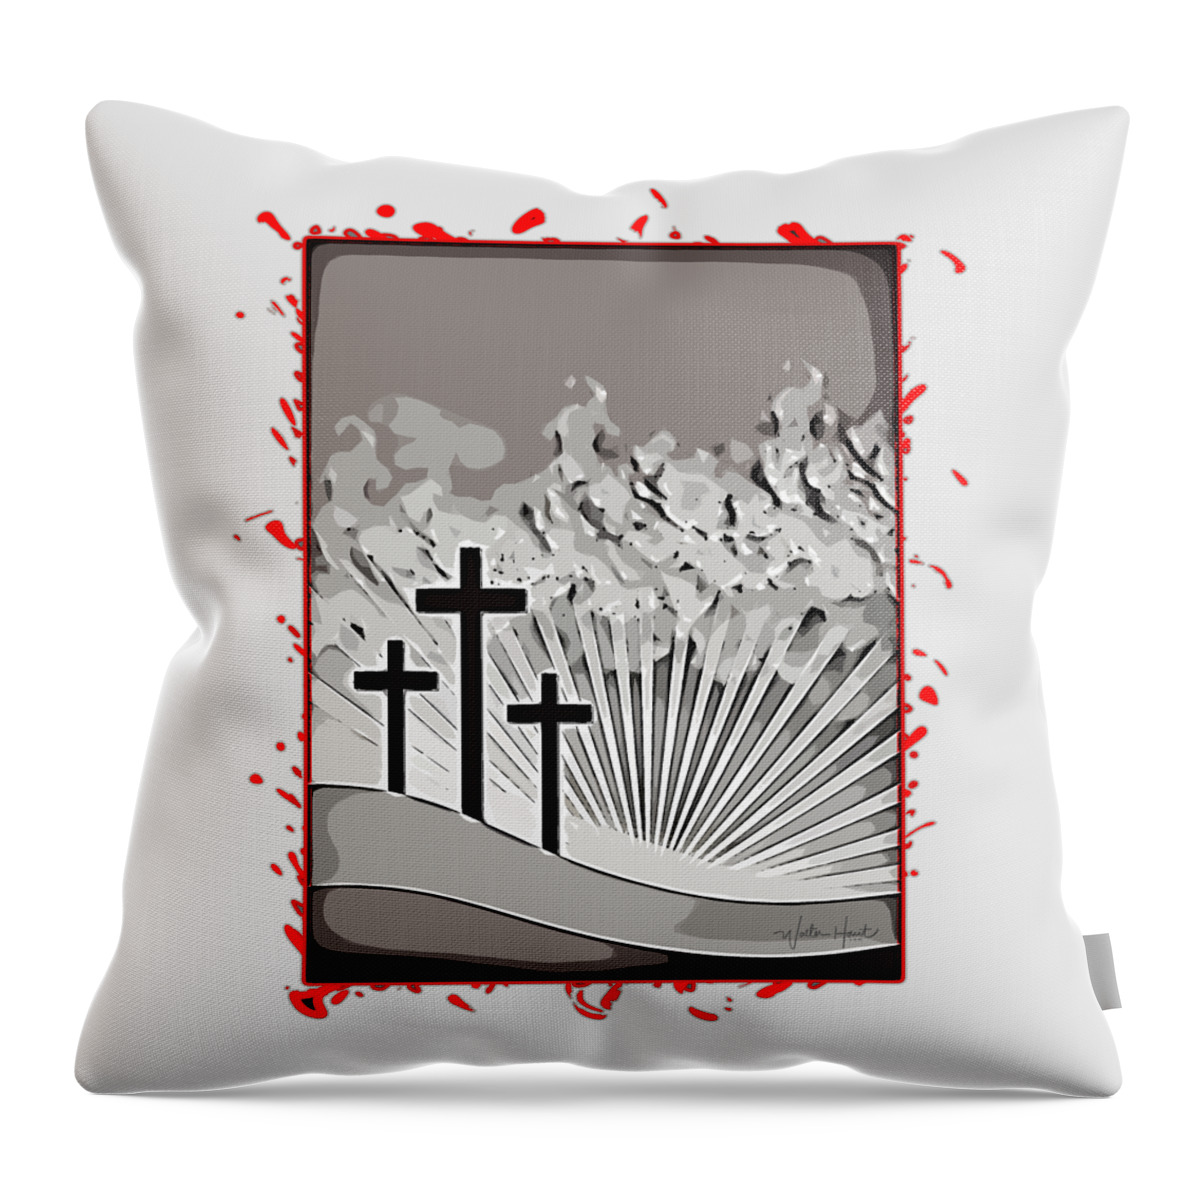 Three Calvary Crosses Throw Pillow featuring the digital art Three Calvary Crosses with Blood by Walter Herrit